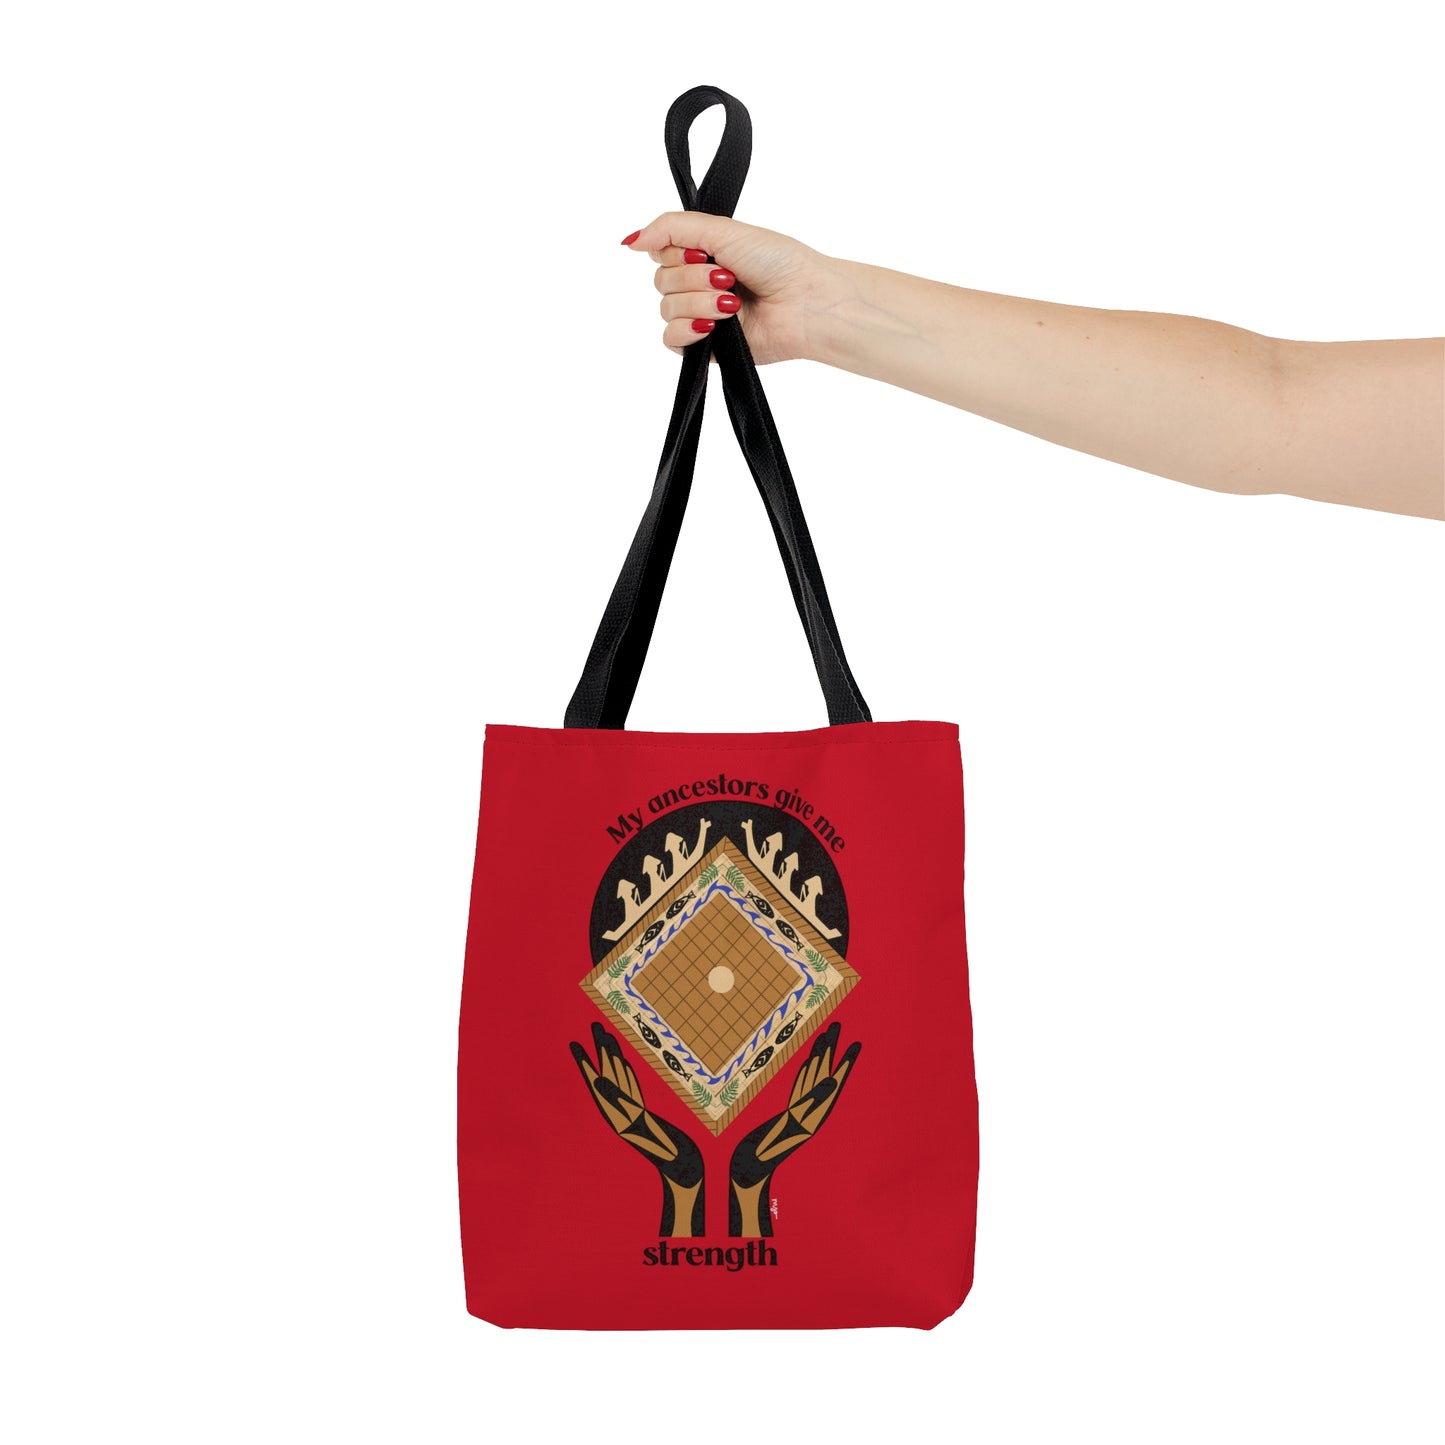 My Ancestors Give Me Strength Tote